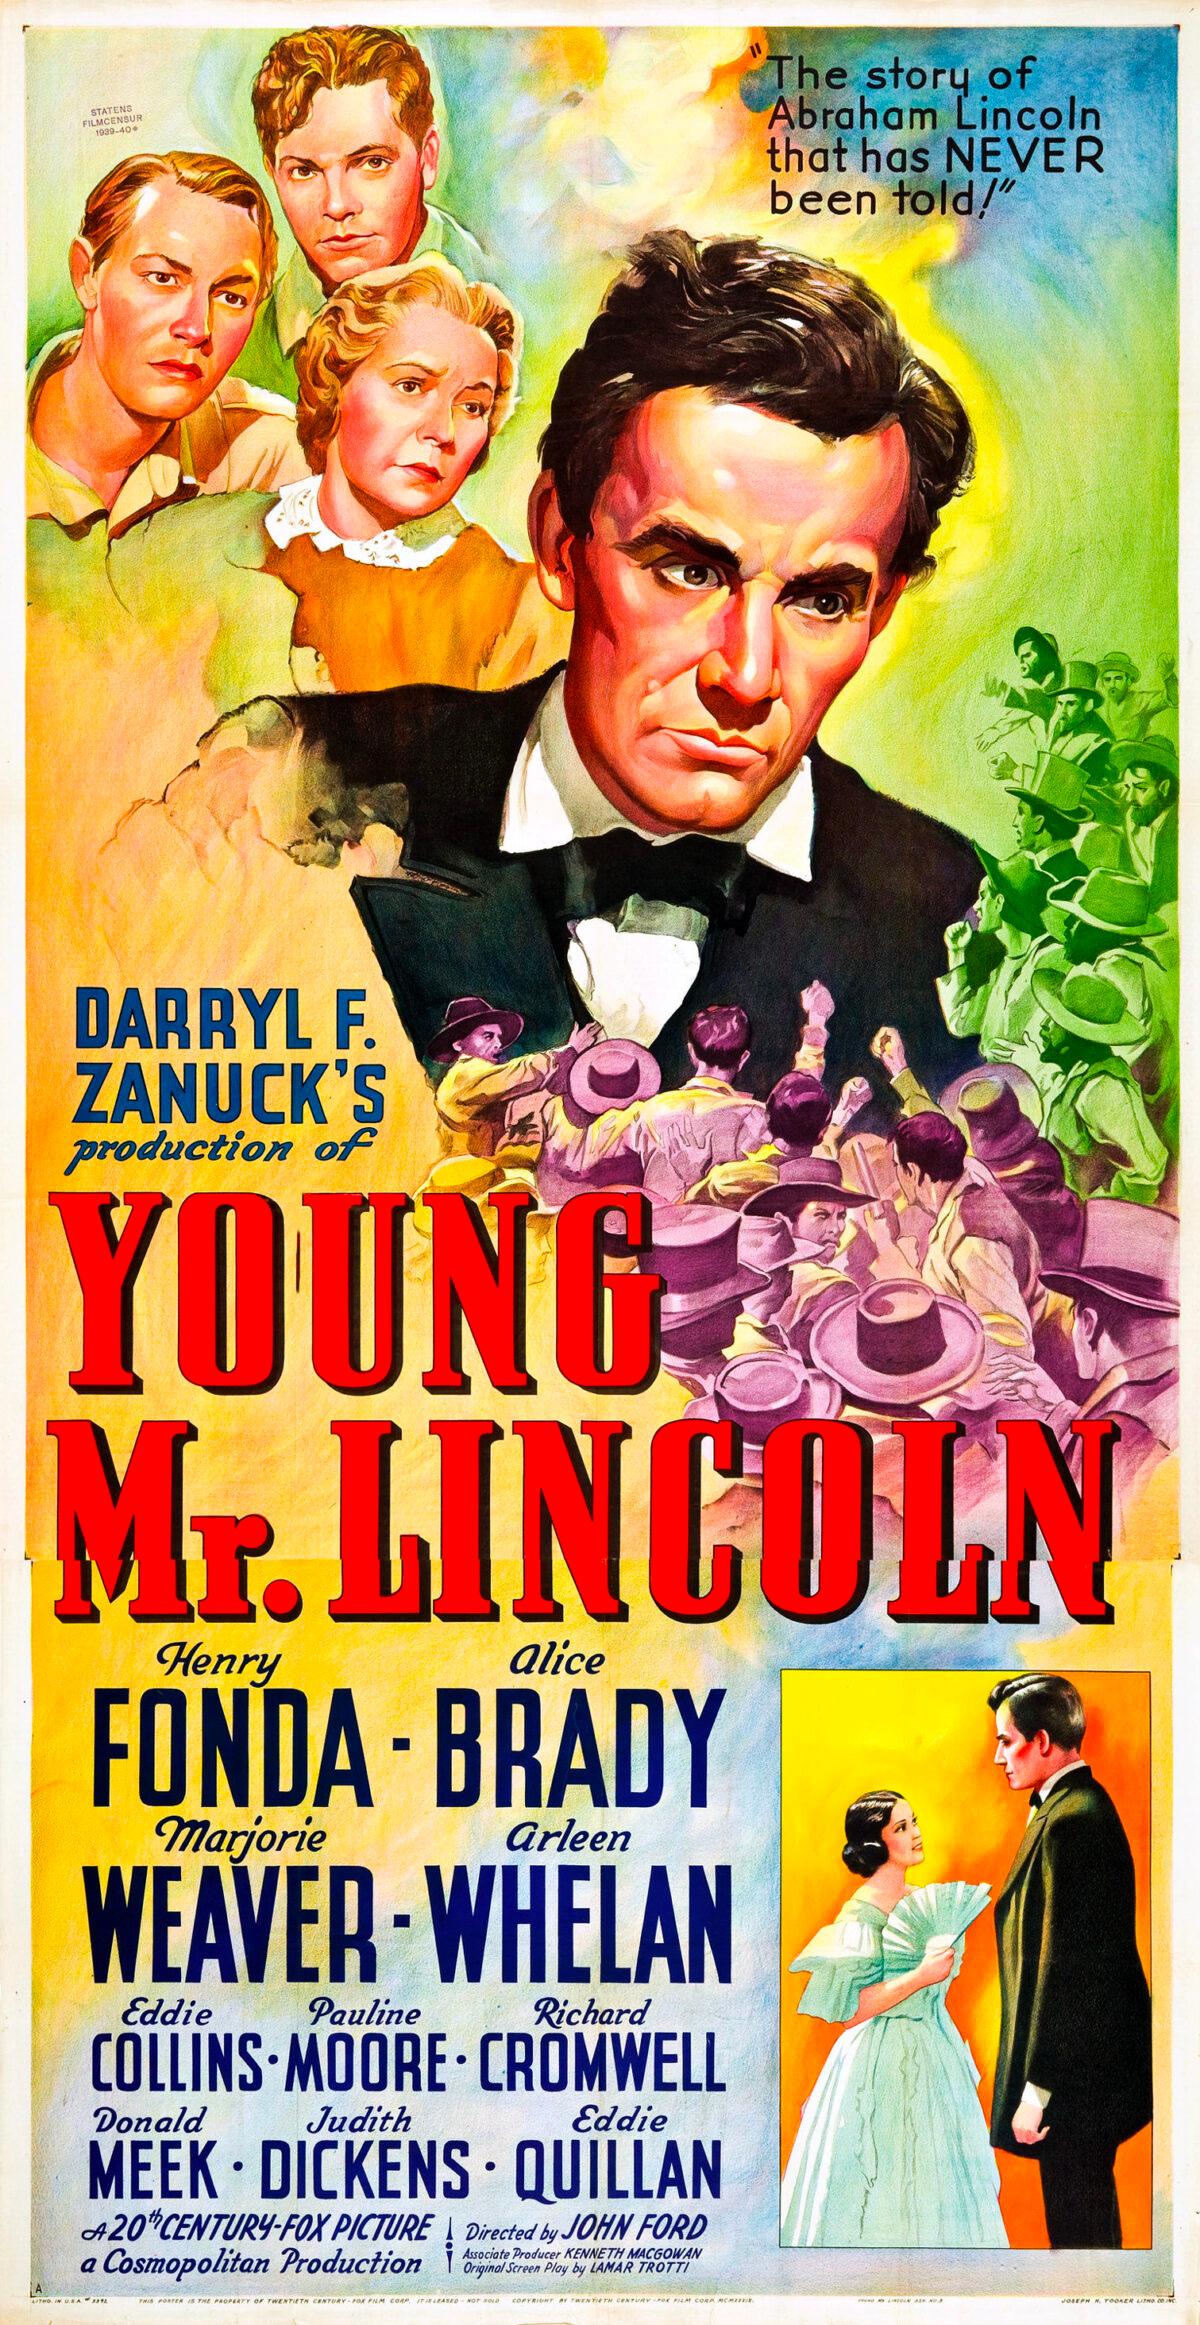 Theatrical release poster for the 1939 film "Young Mr. Lincoln," about the early life of the American president. (Public Domain)